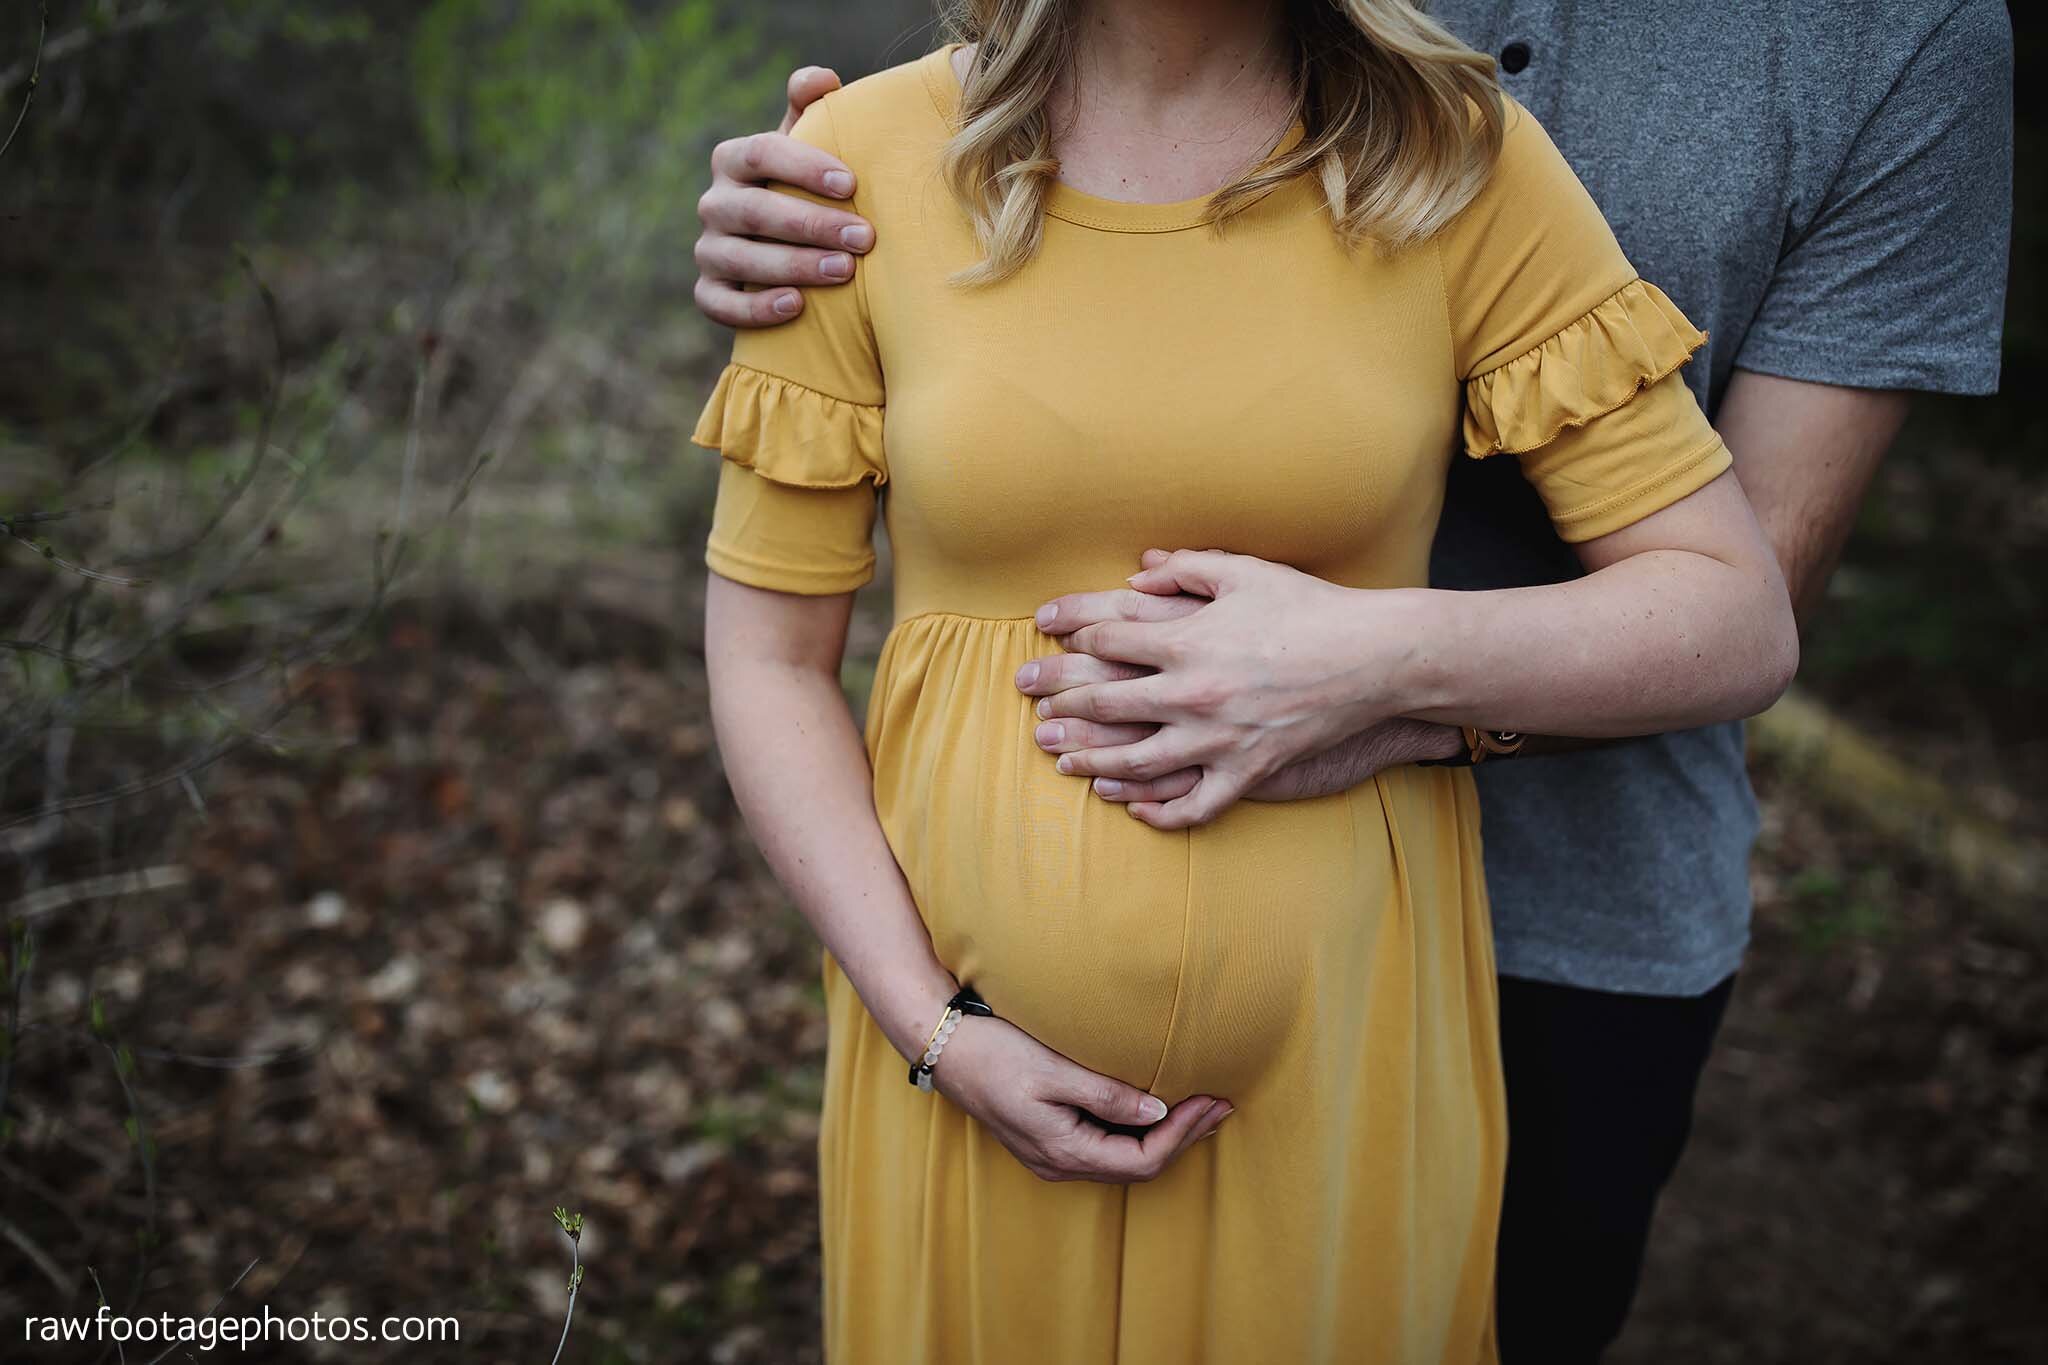 london_ontario_maternity_photographer-raw_footage_photography-in_home_lifestyle_maternity-forest_maternity_session-yellow_maternity_dress_020.jpg